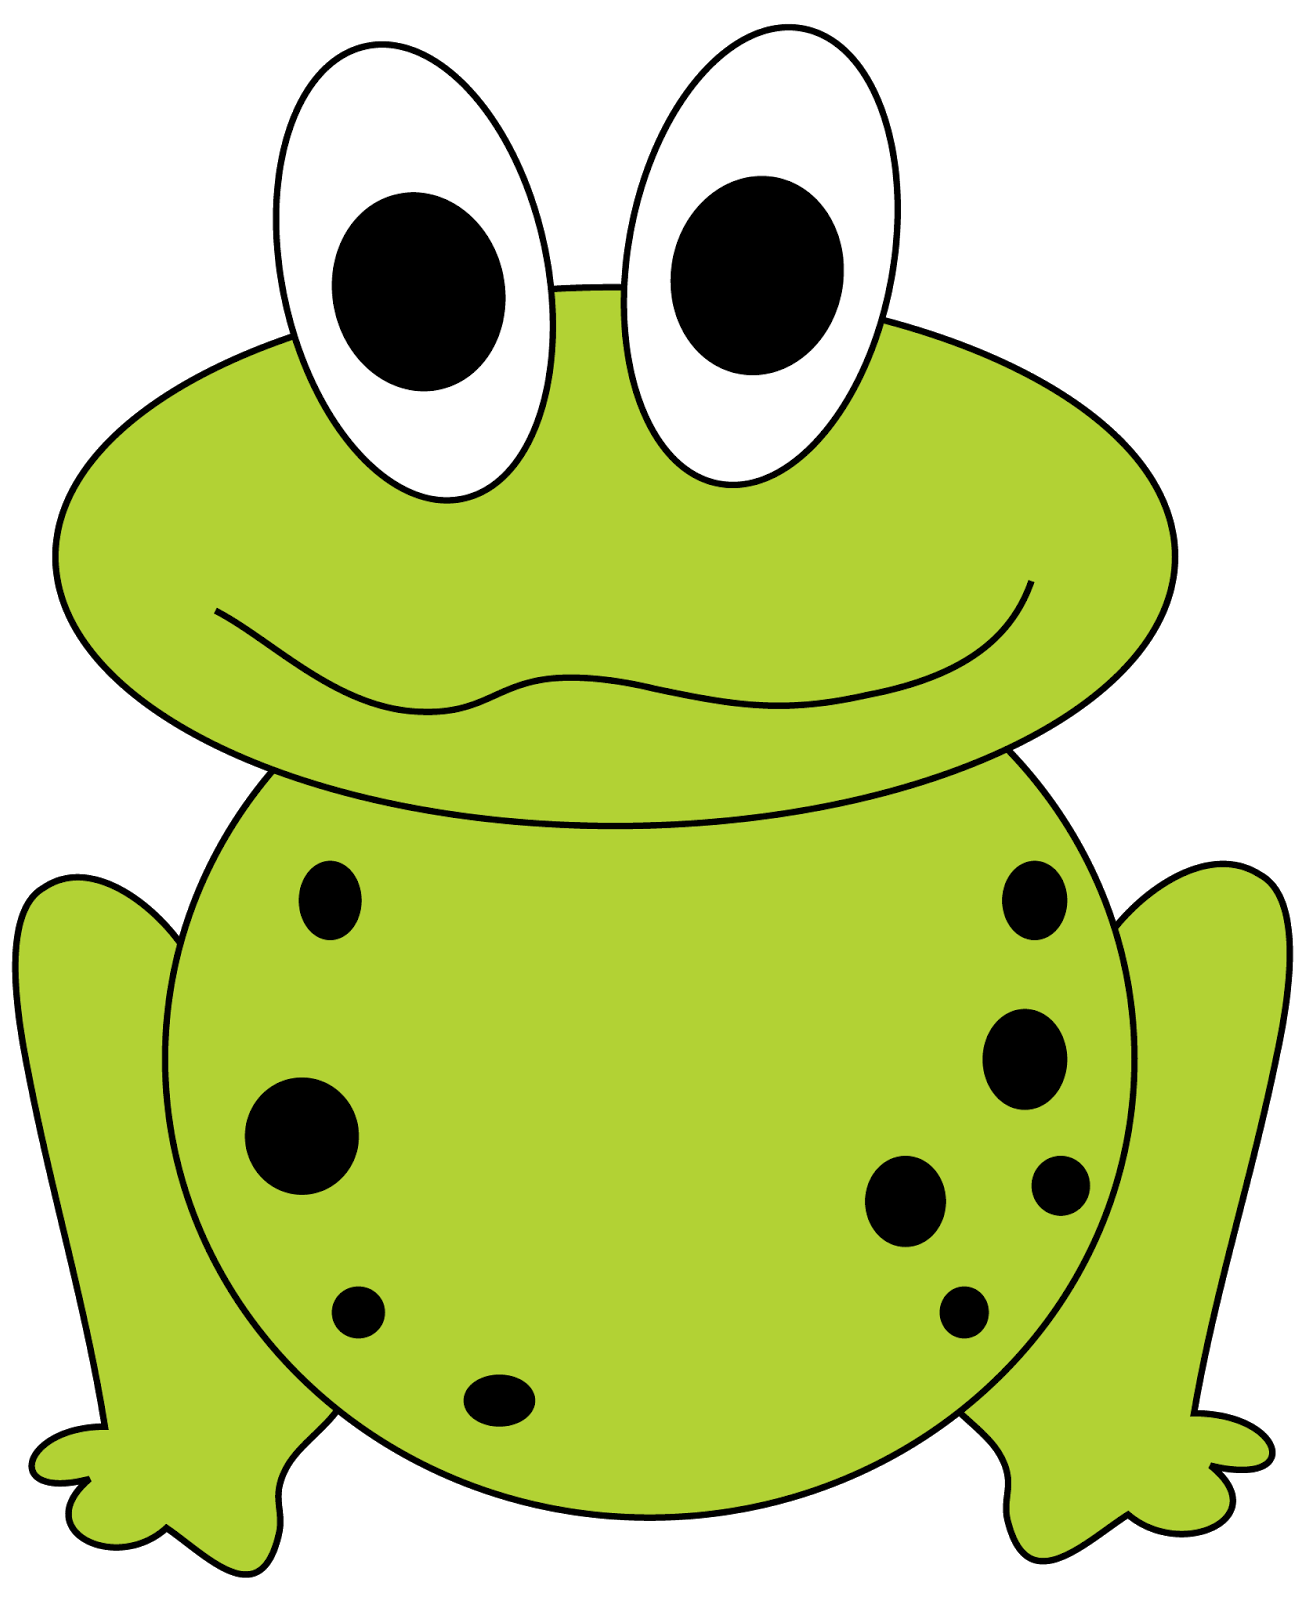 Frog Clipart Frog Clipart Frog Clipart Frog Clipart Share Frog